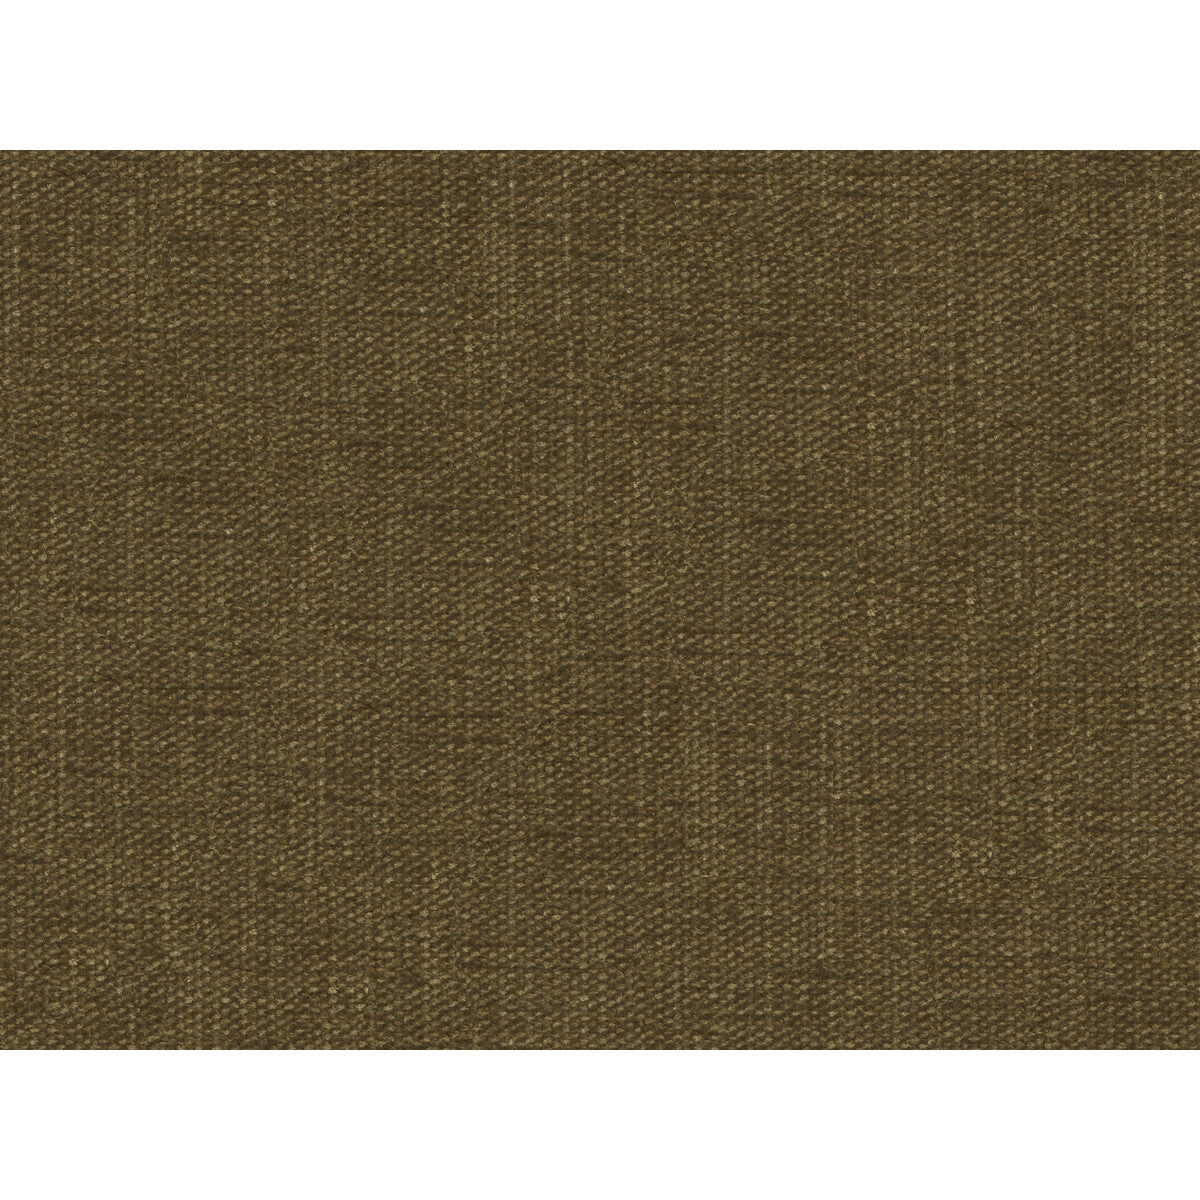 Kravet Contract fabric in 34961-106 color - pattern 34961.106.0 - by Kravet Contract in the Performance Kravetarmor collection